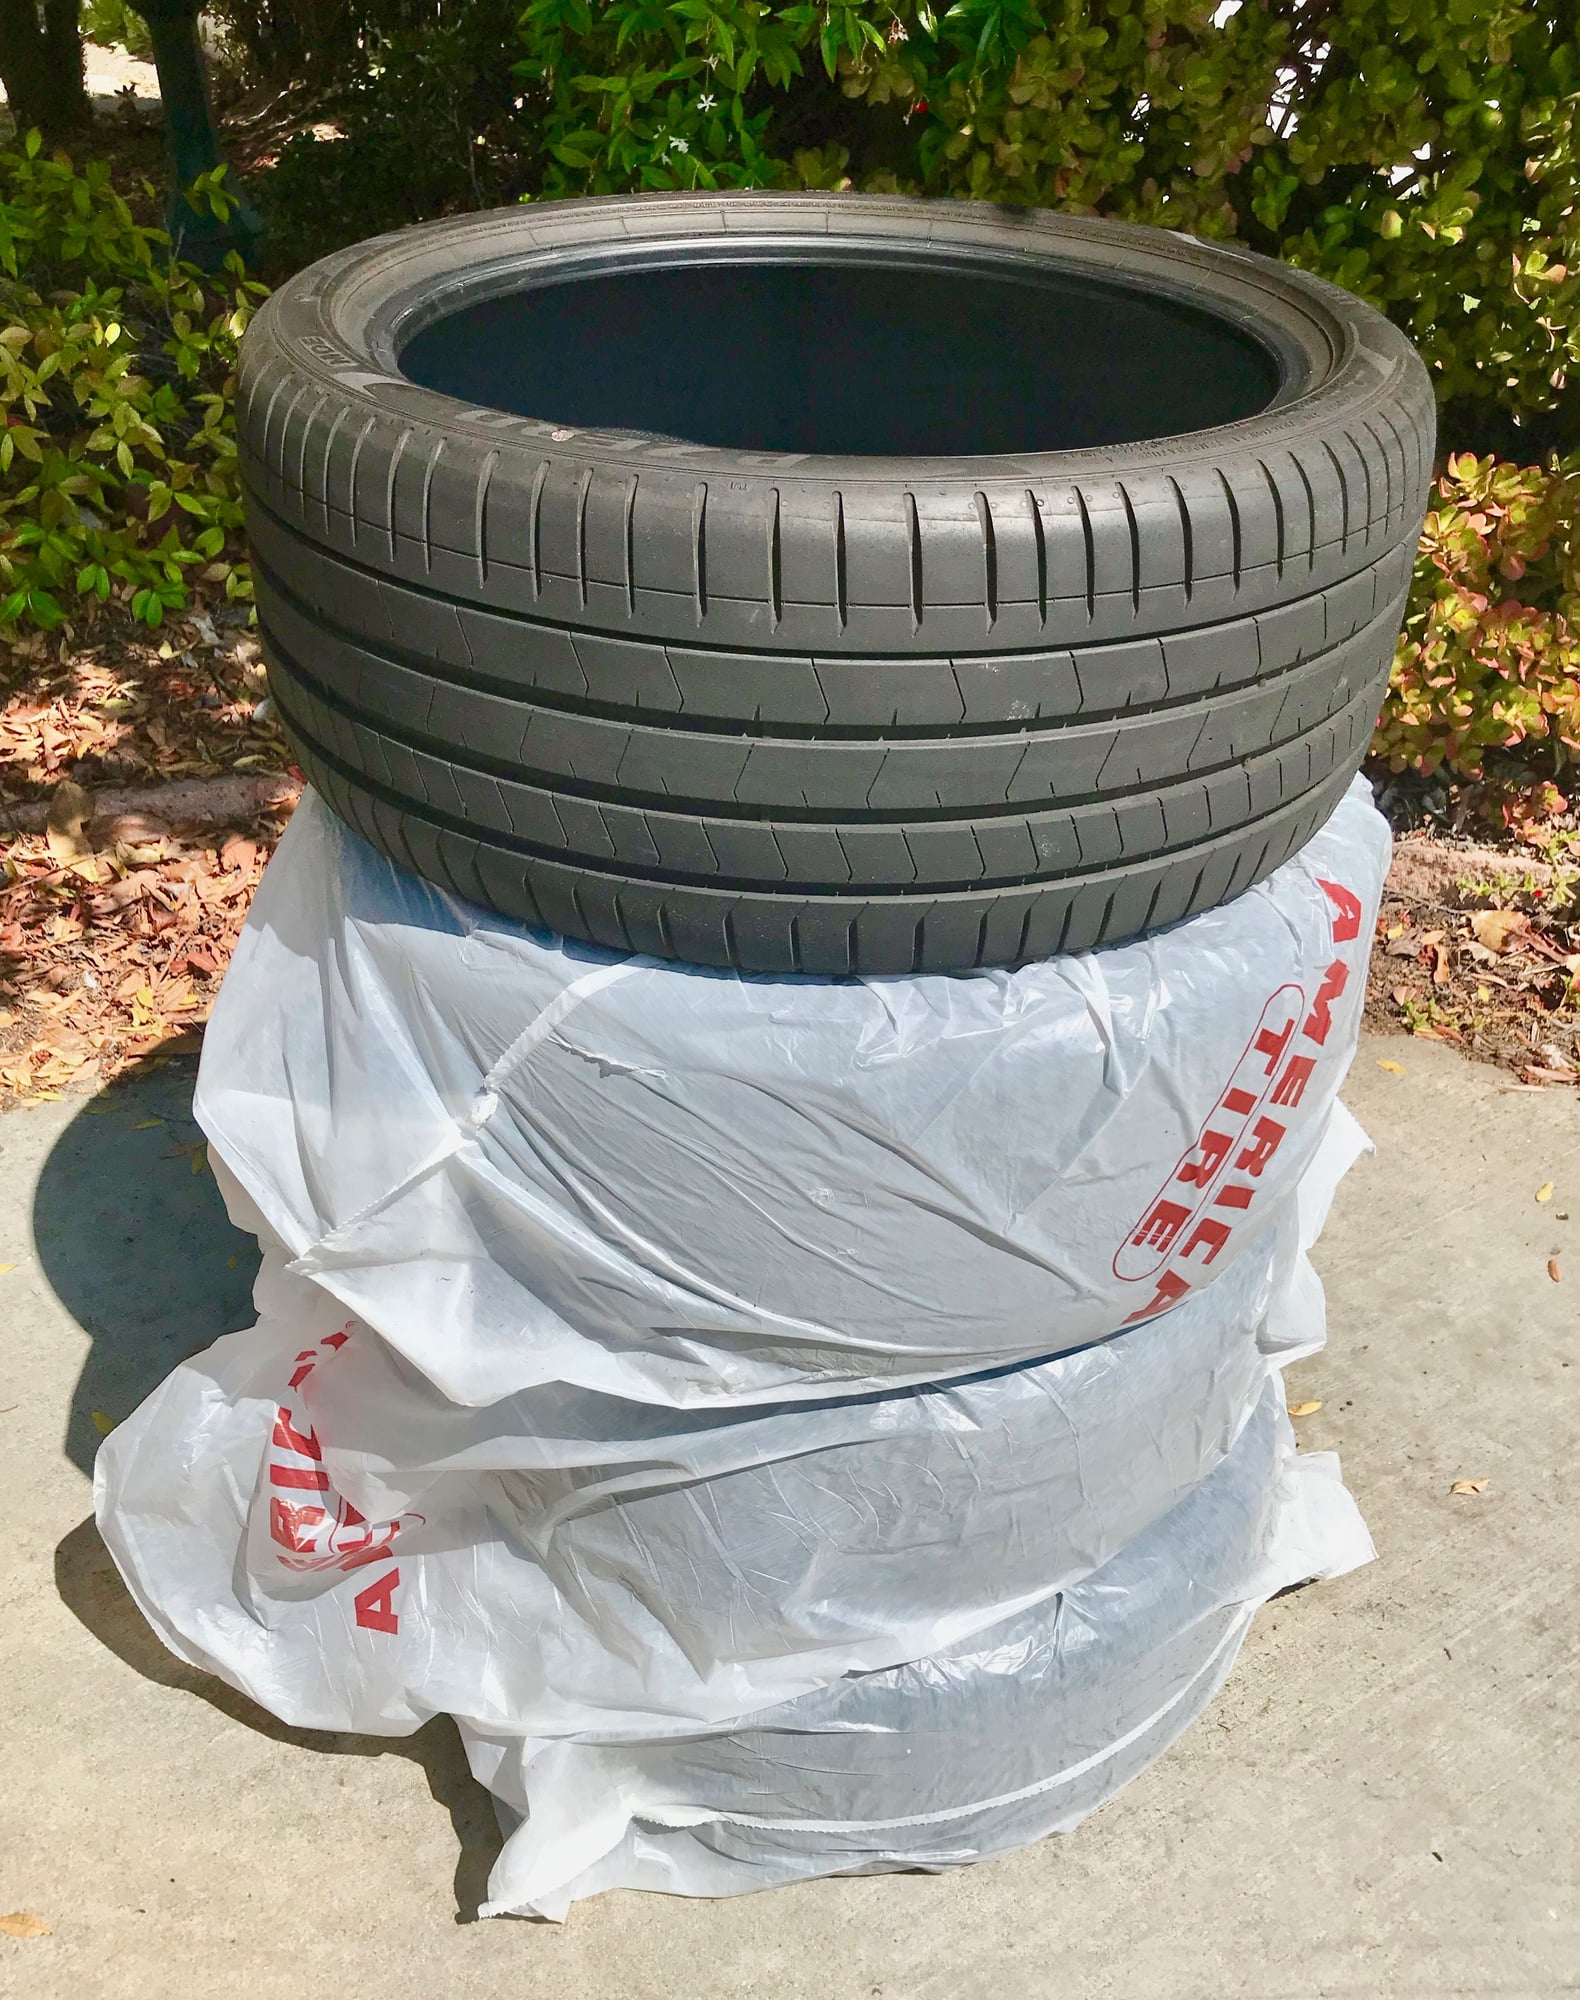 Wheels and Tires/Axles - Pirelli Tires from C43, 19", used 5504 mi., excellent condition, - Used - 2018 to 2019 Mercedes-Benz C43 AMG - Seal Beach, CA 90740, United States